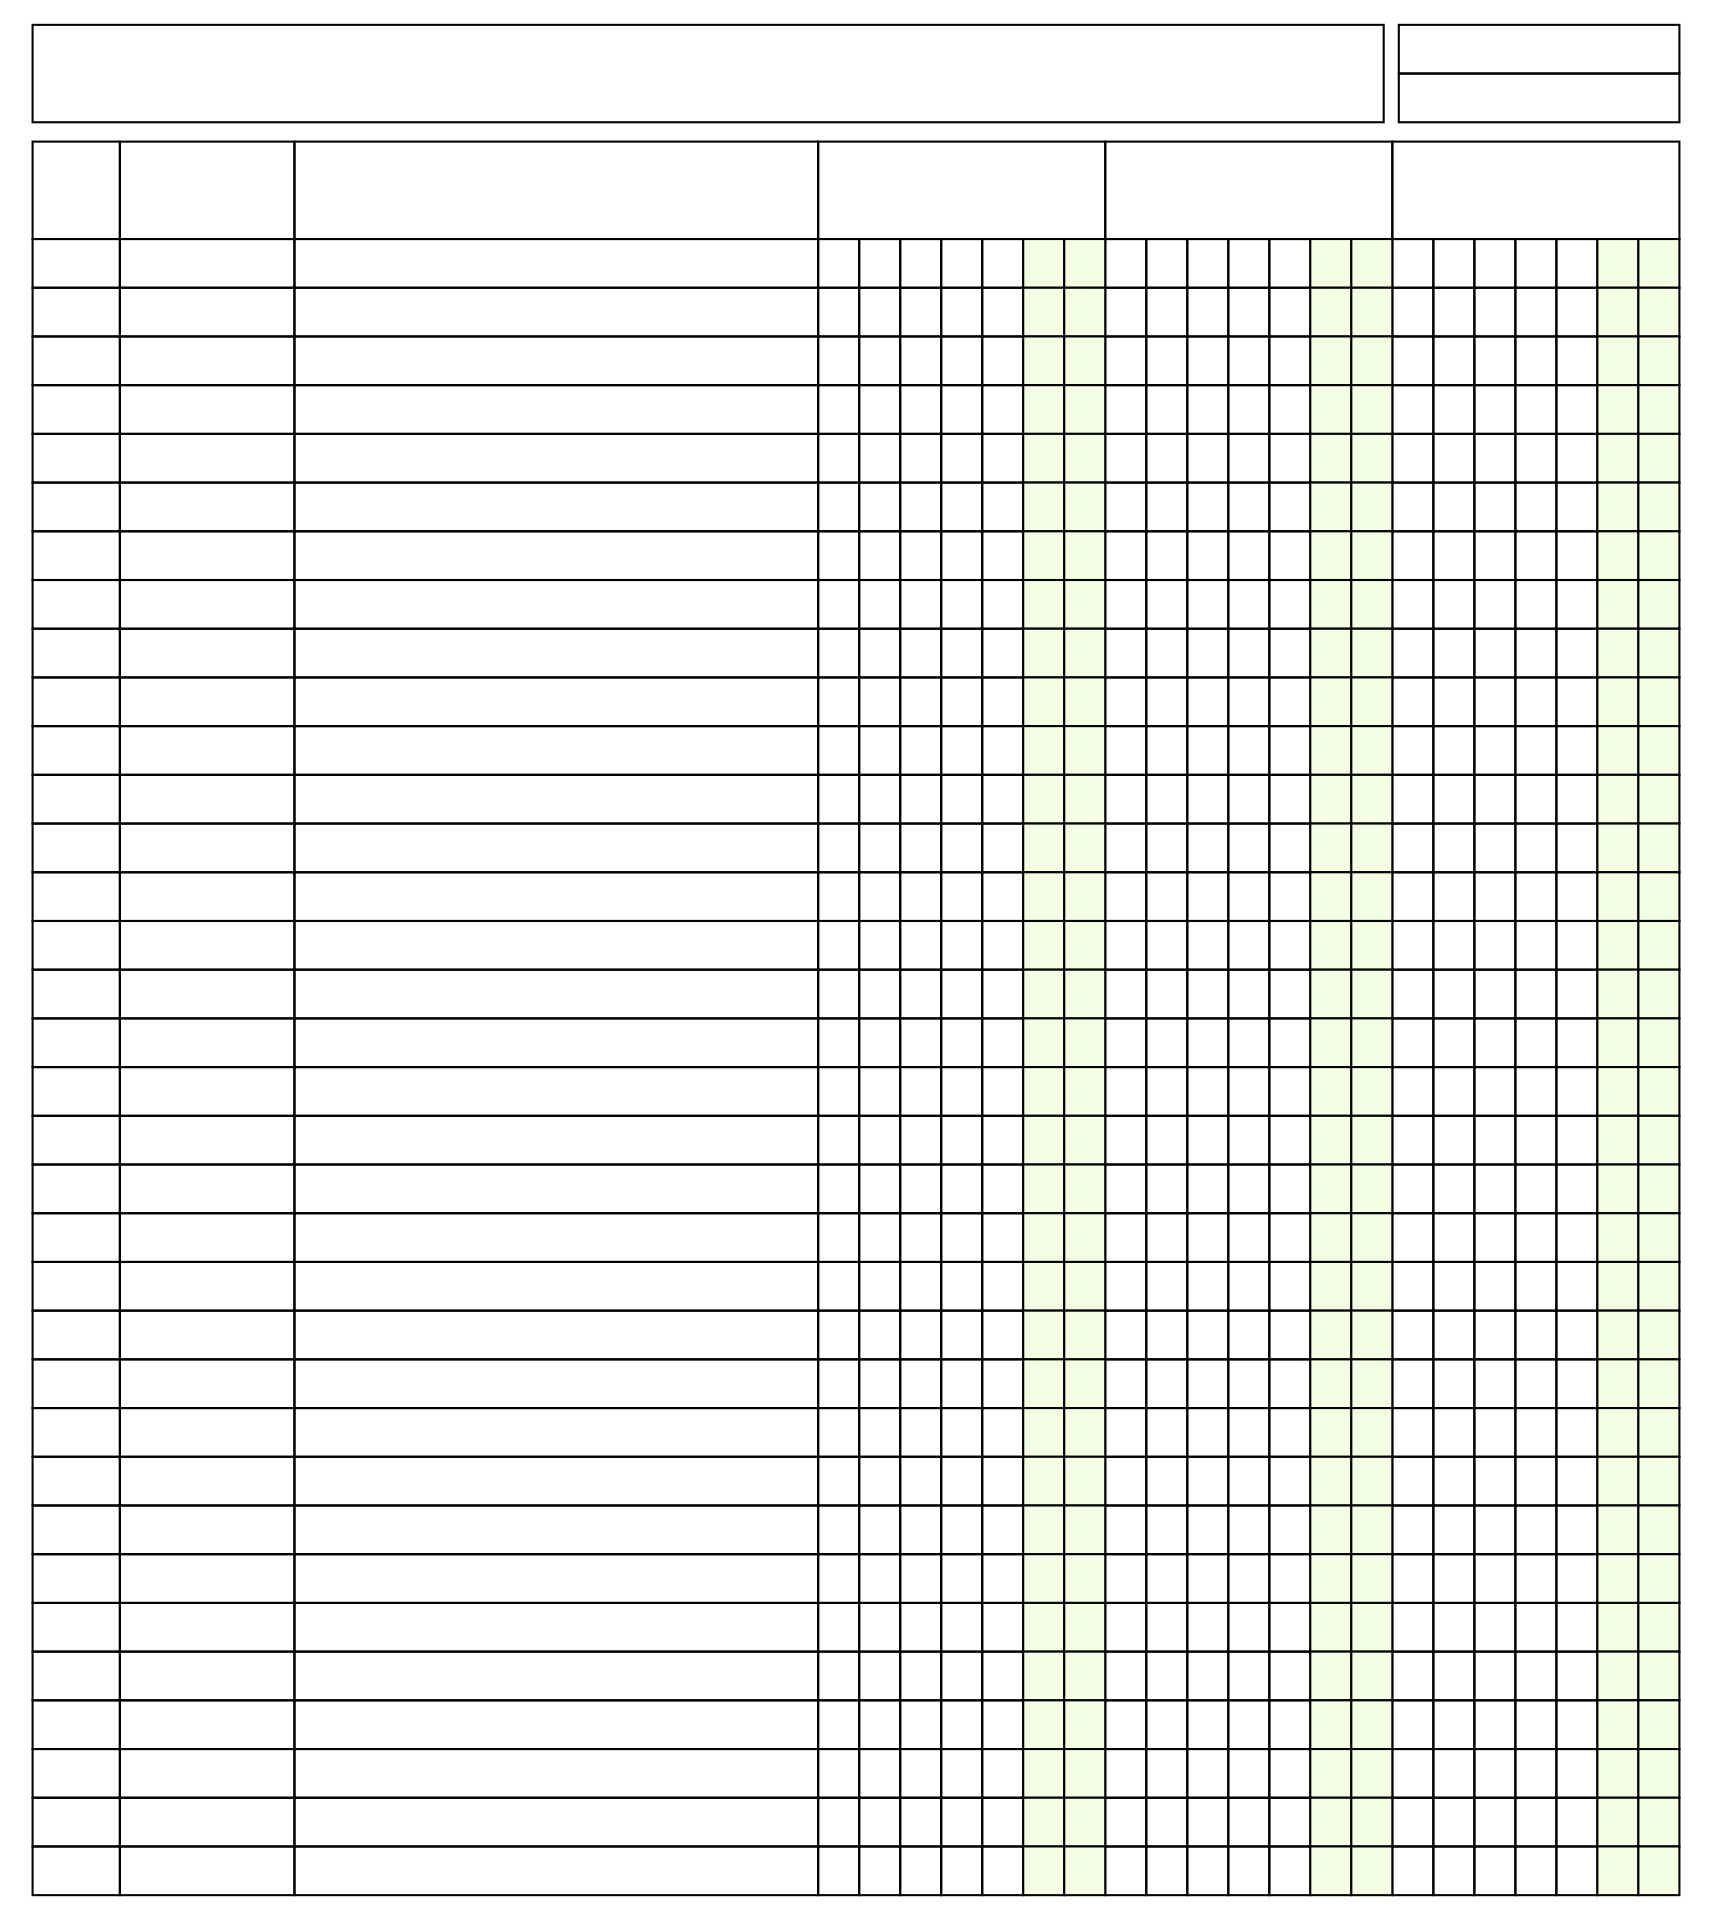 3 Column Lined Paper Template For Your Needs